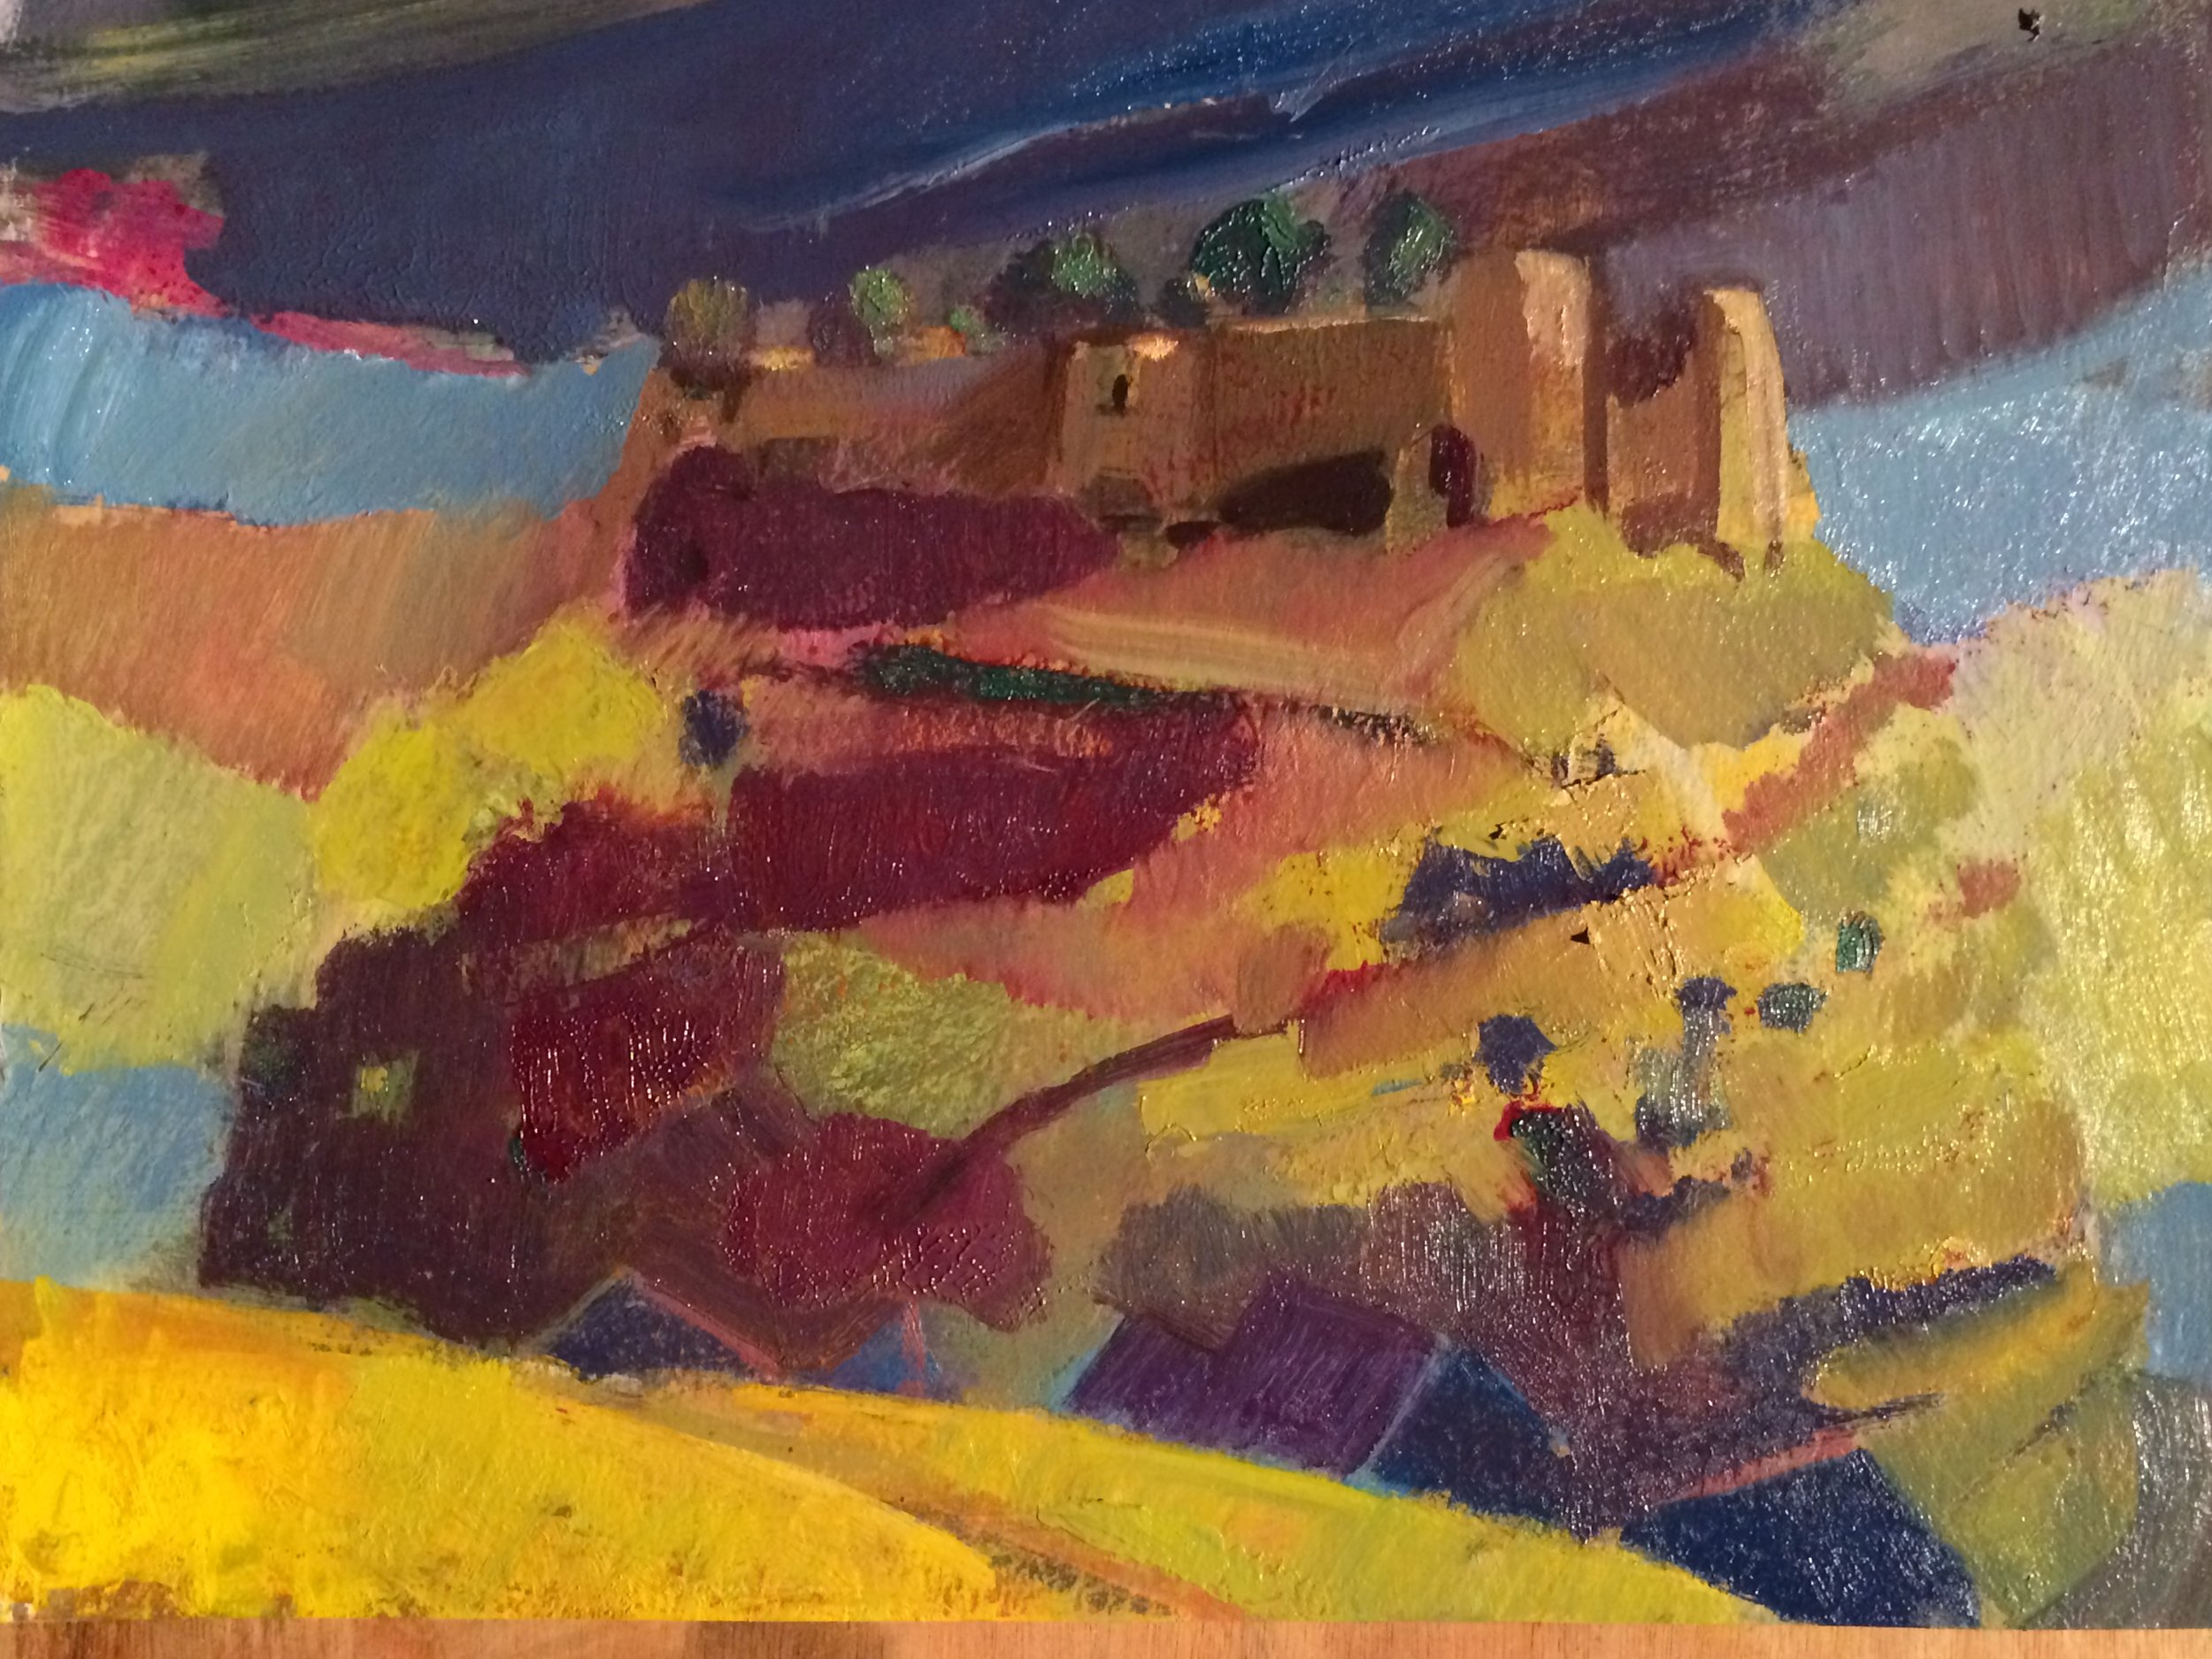    The Castle, study #1   , oil on paper, 11” x 14” 2014 